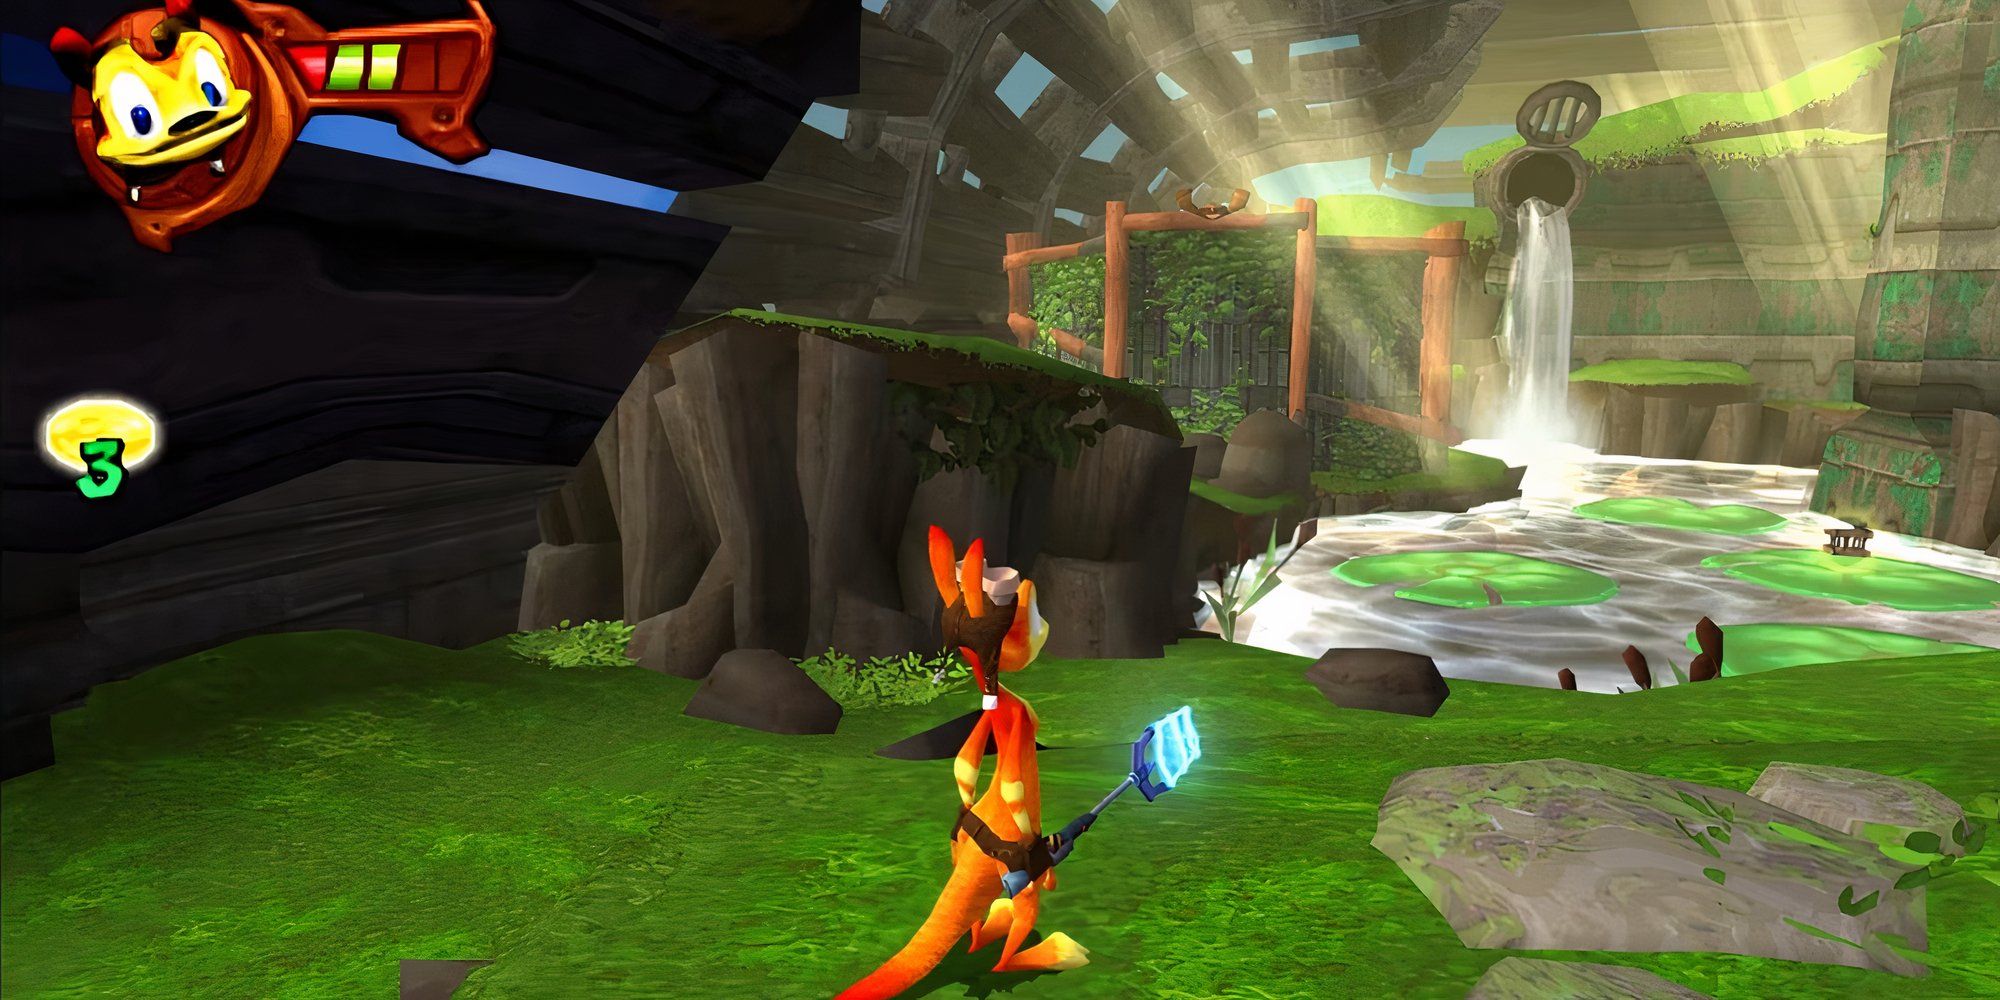 Exploring a level in Daxter